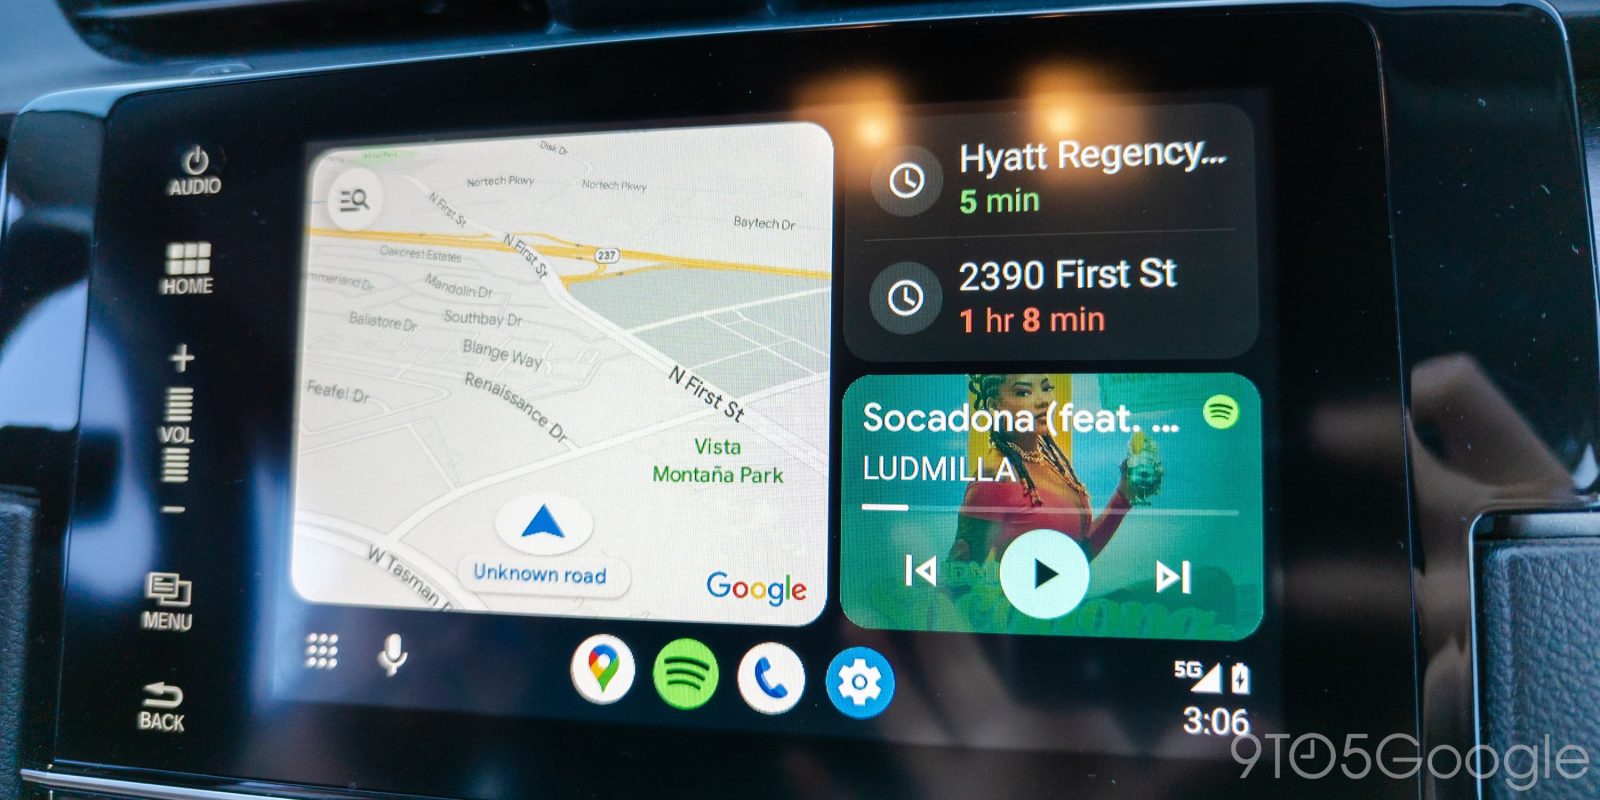 Android Auto updated! New look and better split-screen functionality 